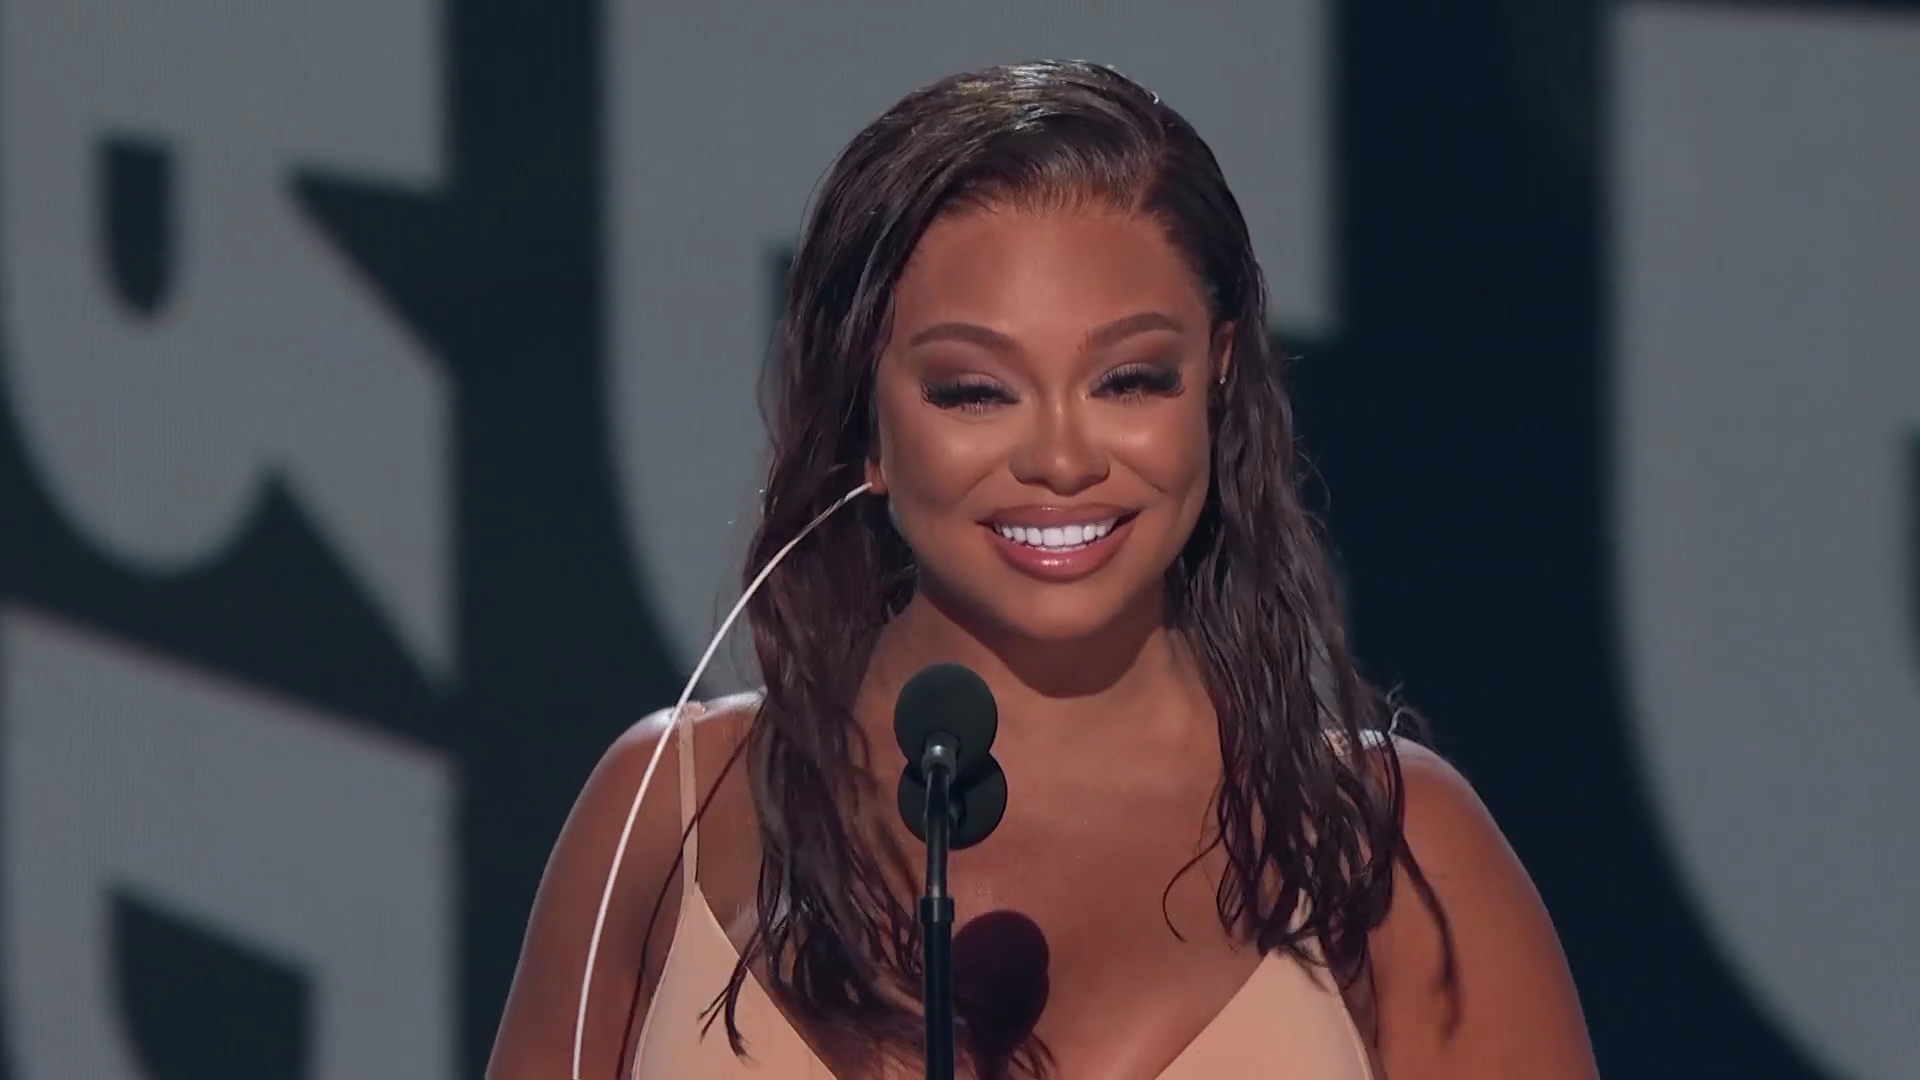 Latto accepts the award for Best New Artist at the BET Awards 2022.